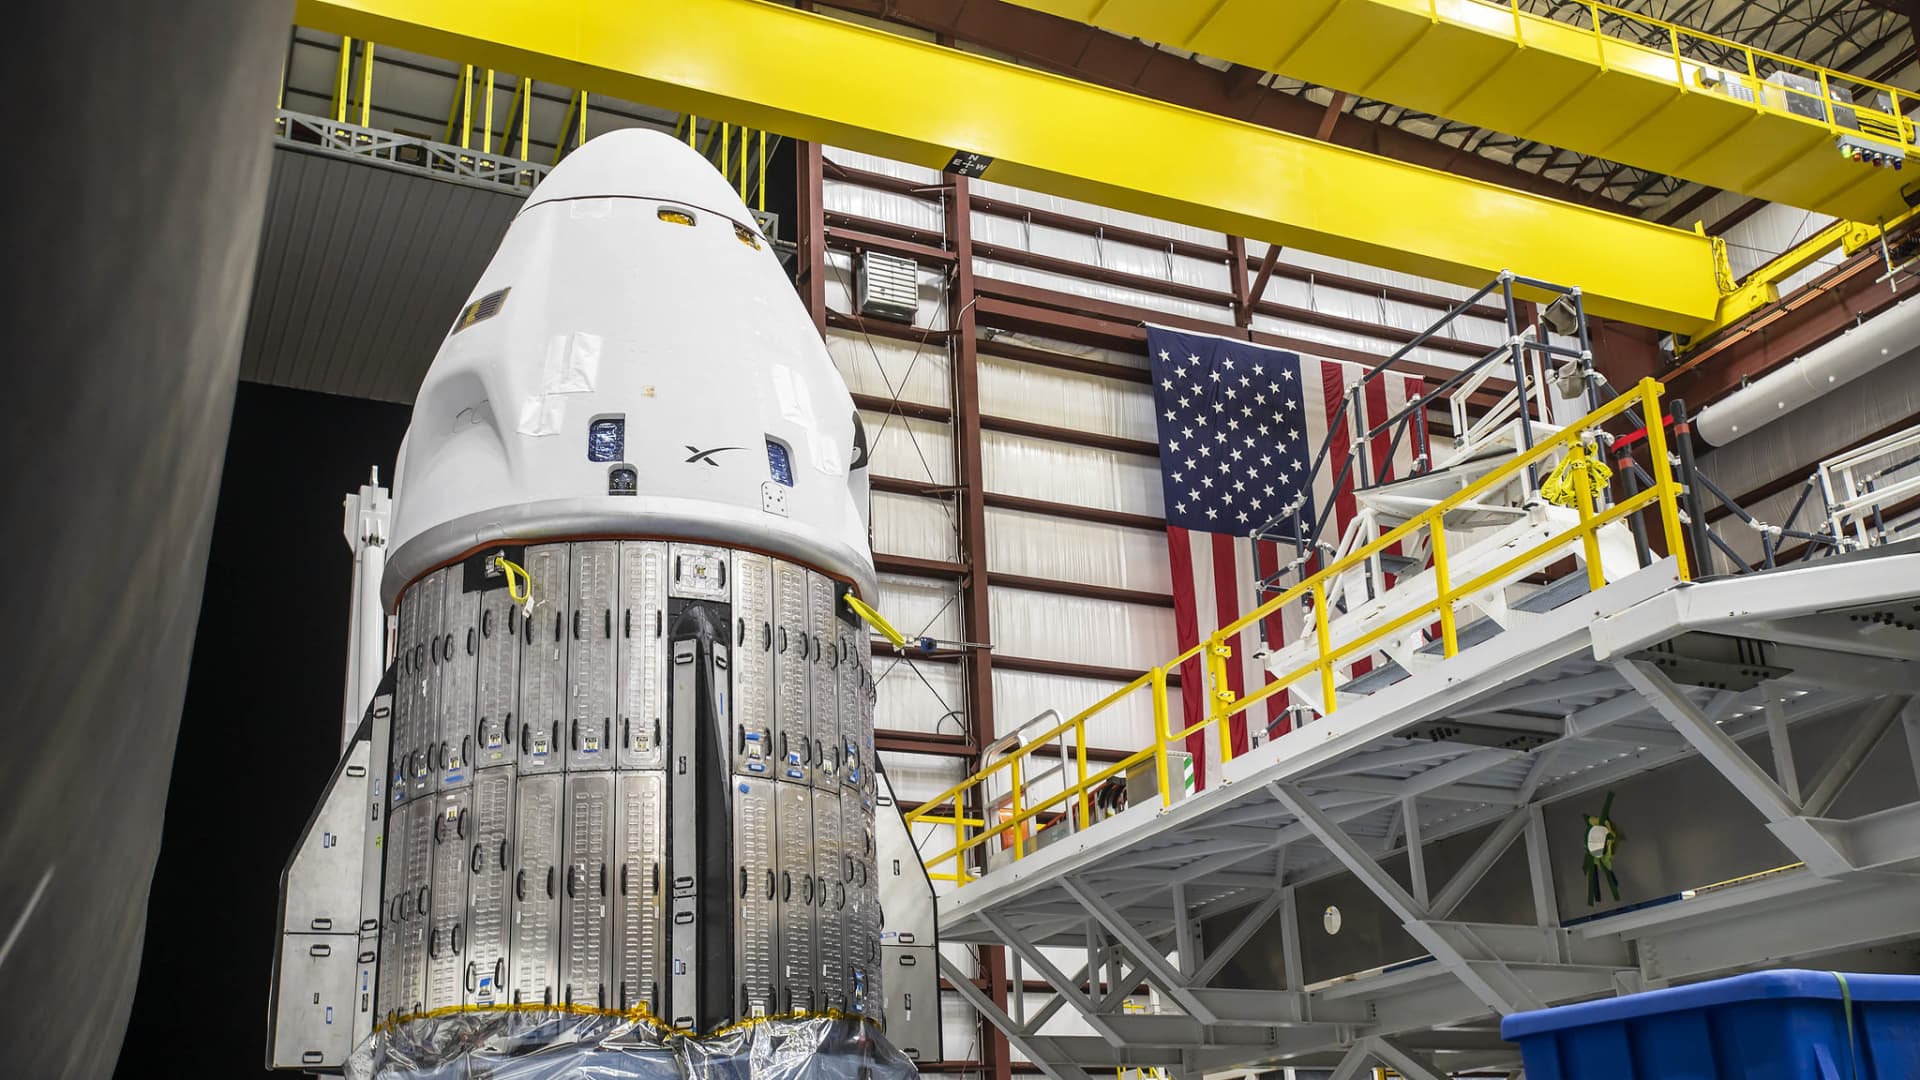 The Crew Dragon spacecraft for NASA's SpaceX Crew-3 mission arrives at the hangar at Kennedy Space Center's Launch Complex 39A in Florida on Oct. 24, 2021.